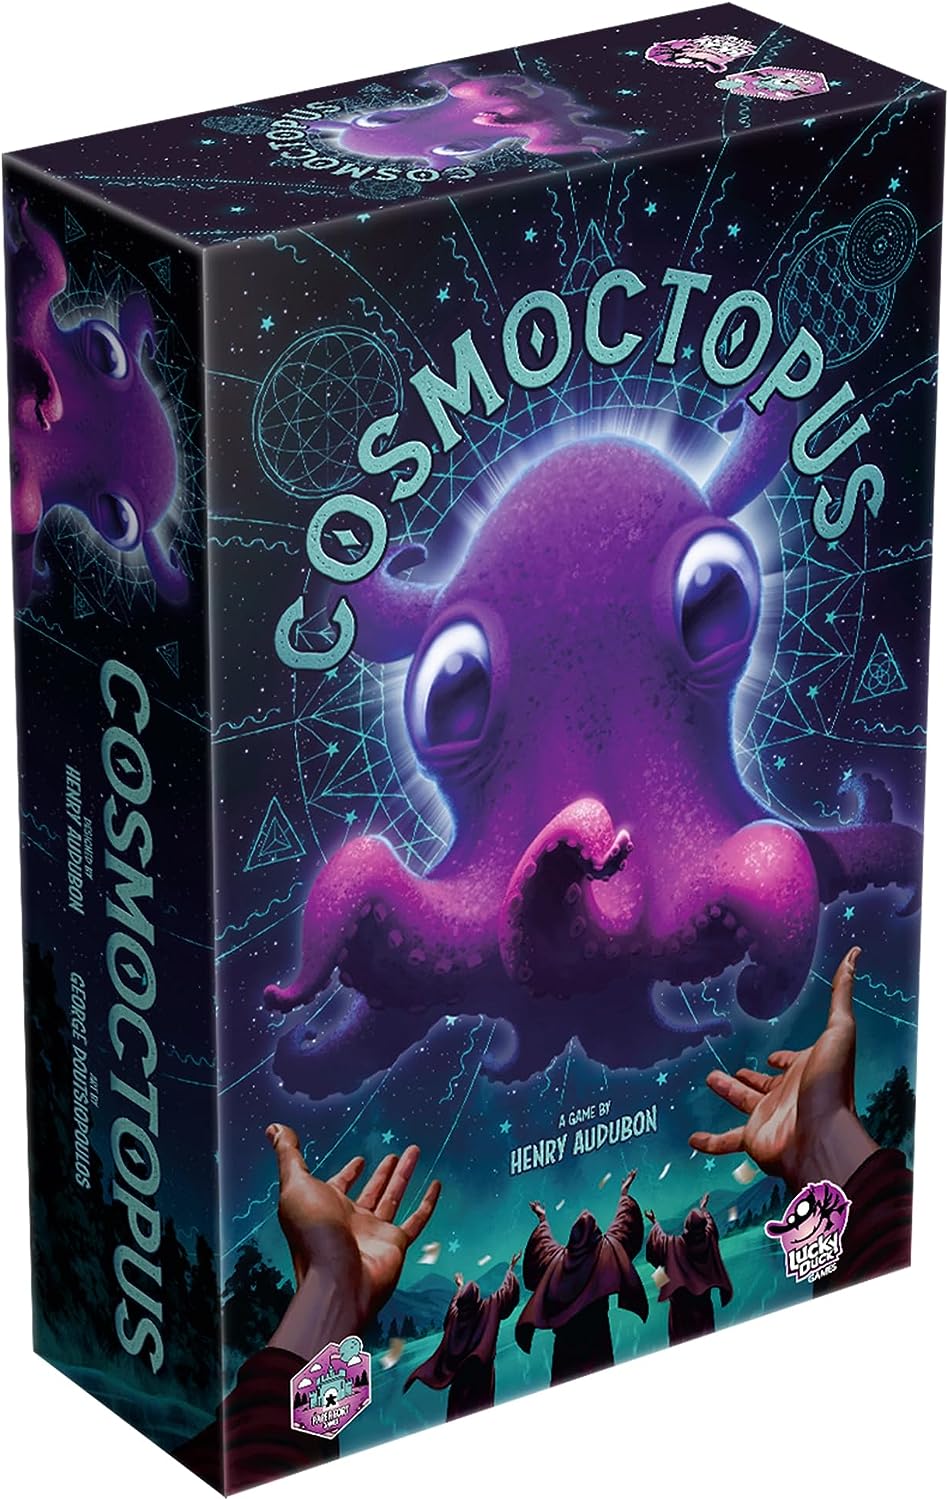 Cosmoctopus board game